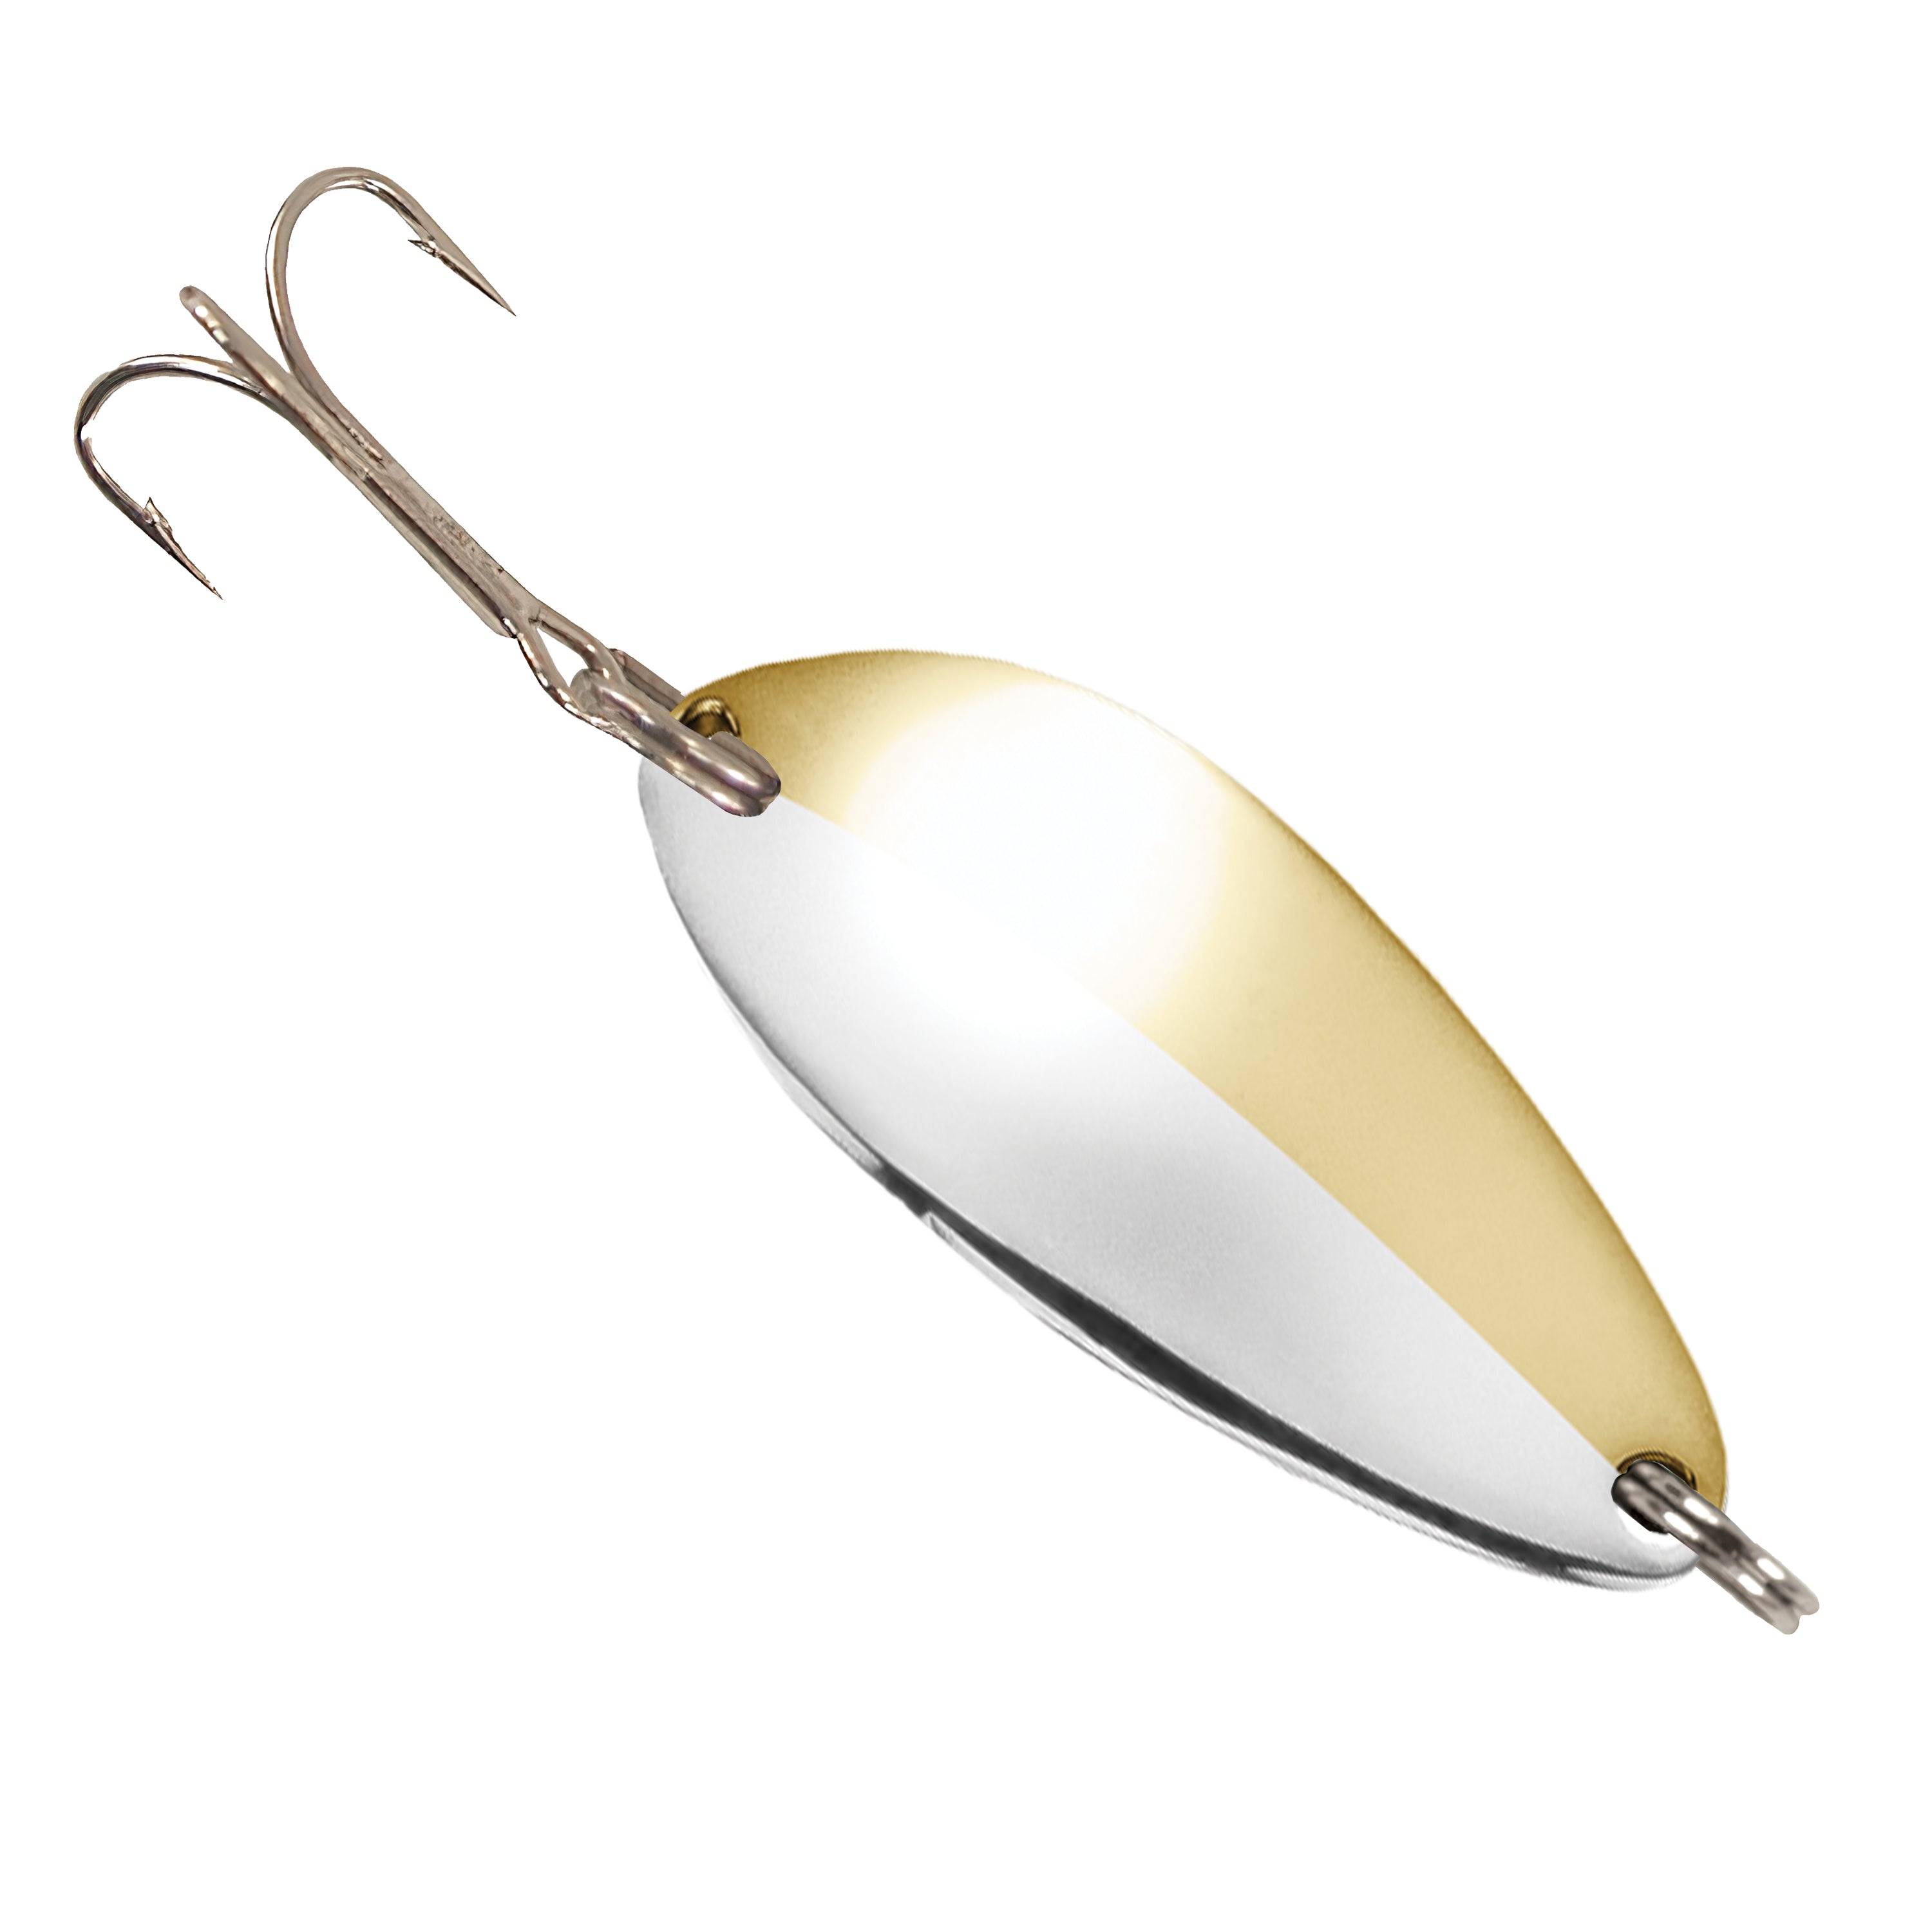 Acme Little Cleo 1/4 Oz Copper Spoon Fishing Light Spinning Lure